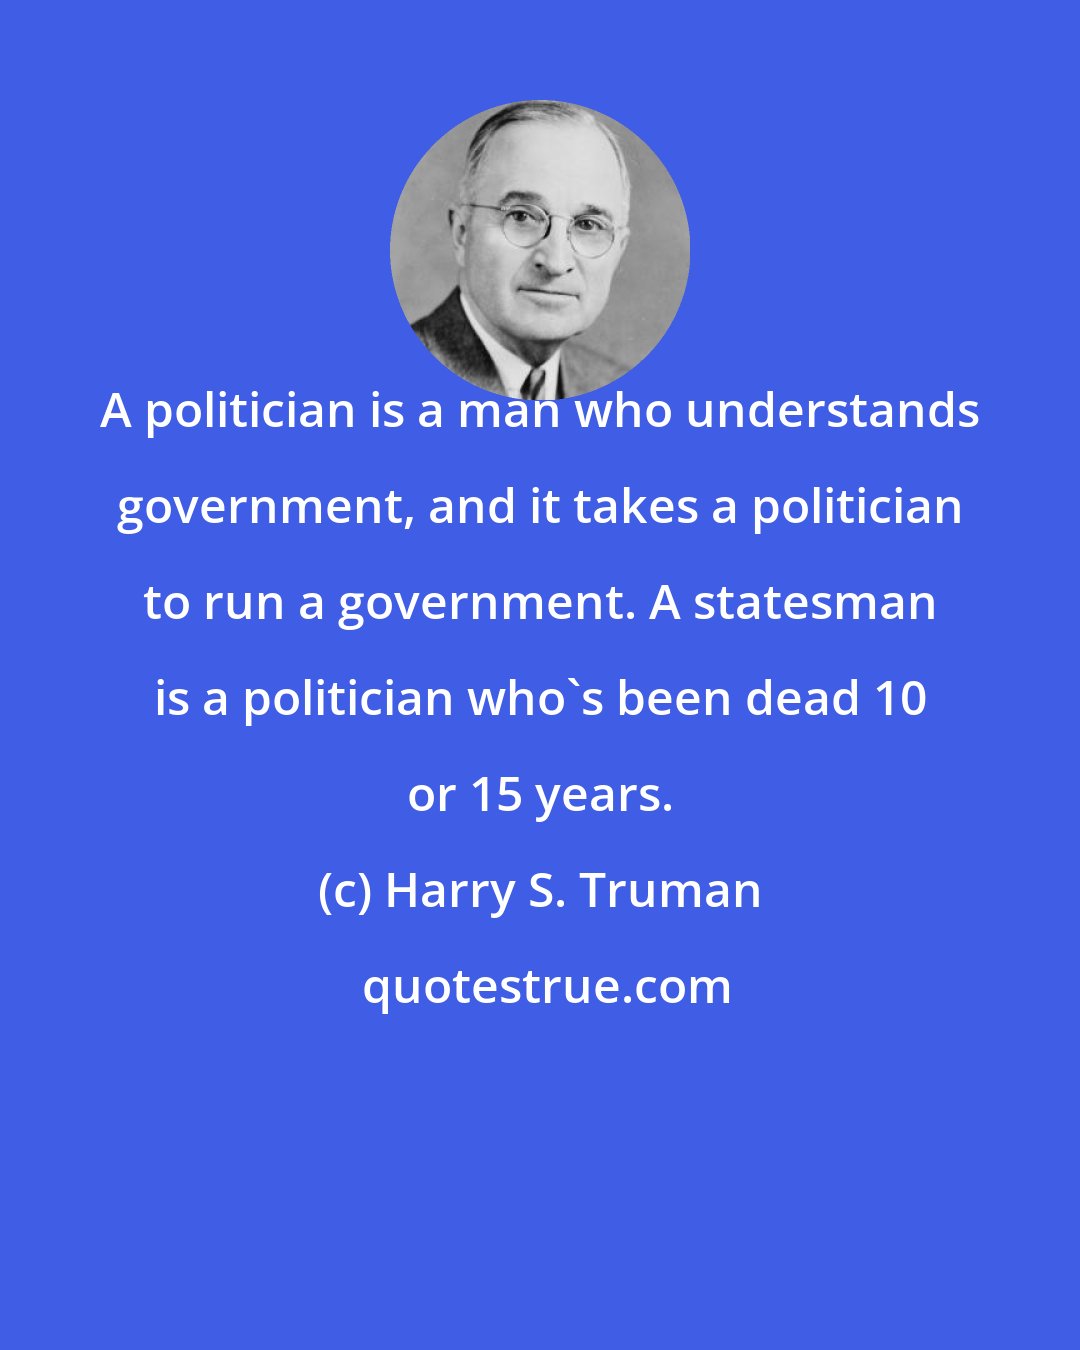 Harry S. Truman: A politician is a man who understands government, and it takes a politician to run a government. A statesman is a politician who's been dead 10 or 15 years.